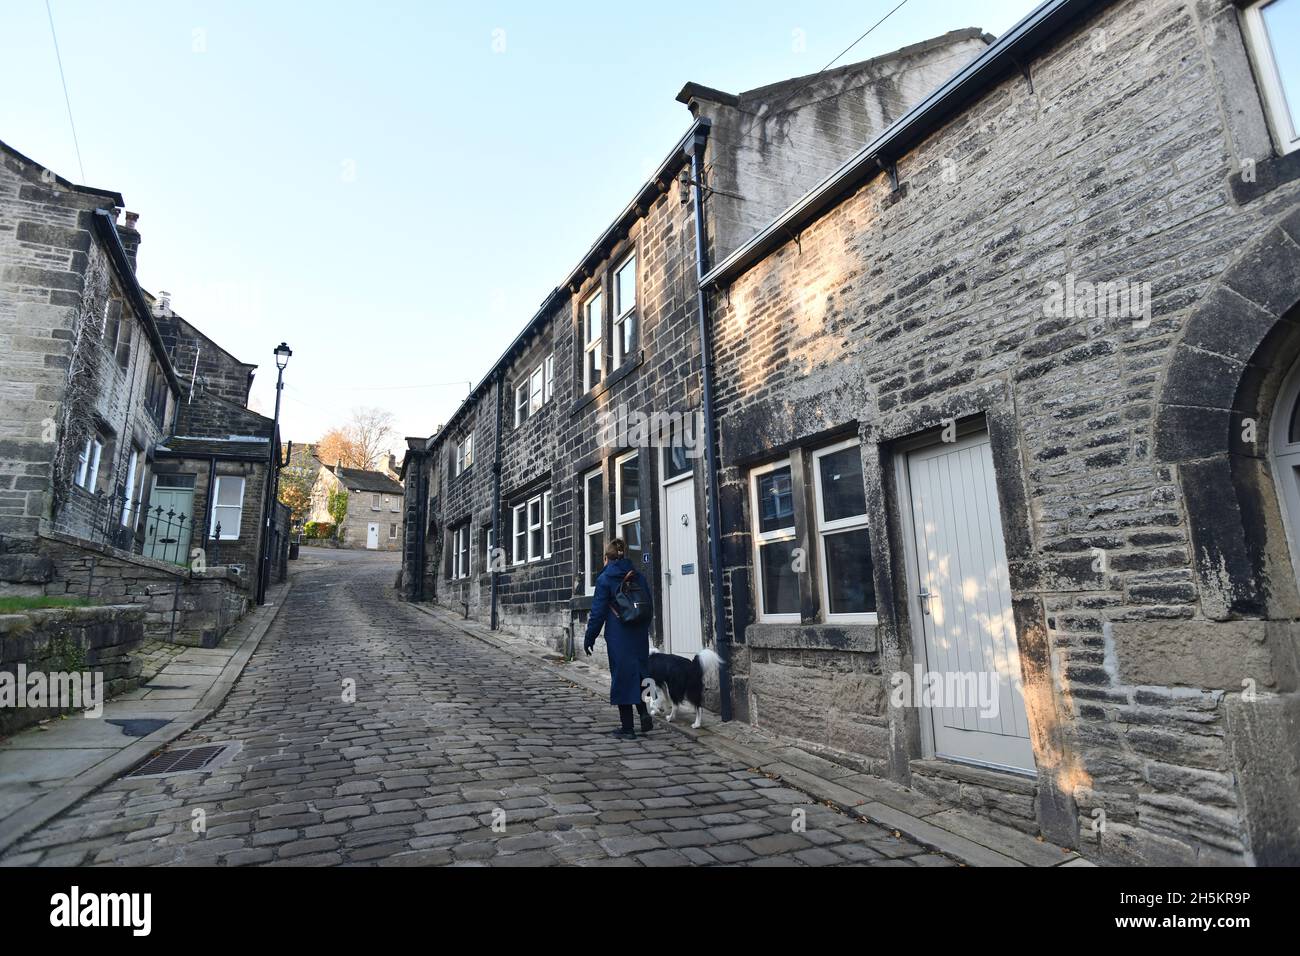 Car free village Heptonstall village in the Calderdale borough of West Yorkshire, England, Residents are not allowed to park their cars on the cobbled Stock Photo